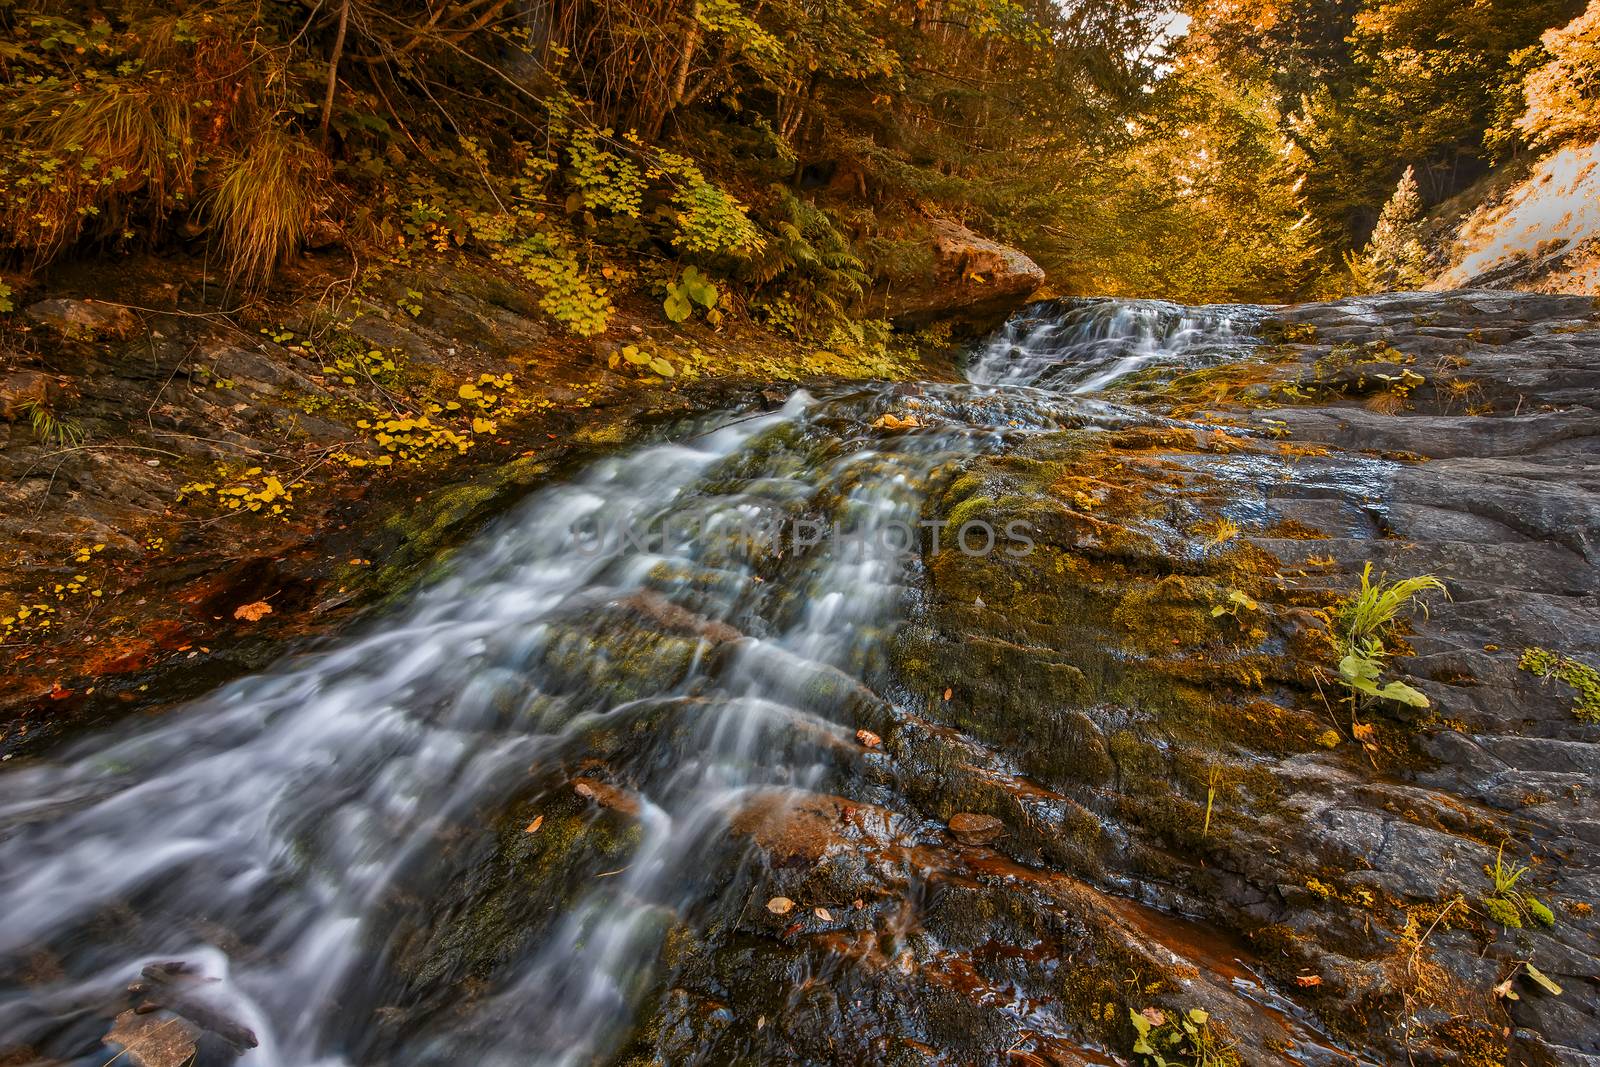 Wild forest in autumn with trees and small river. Long exposure